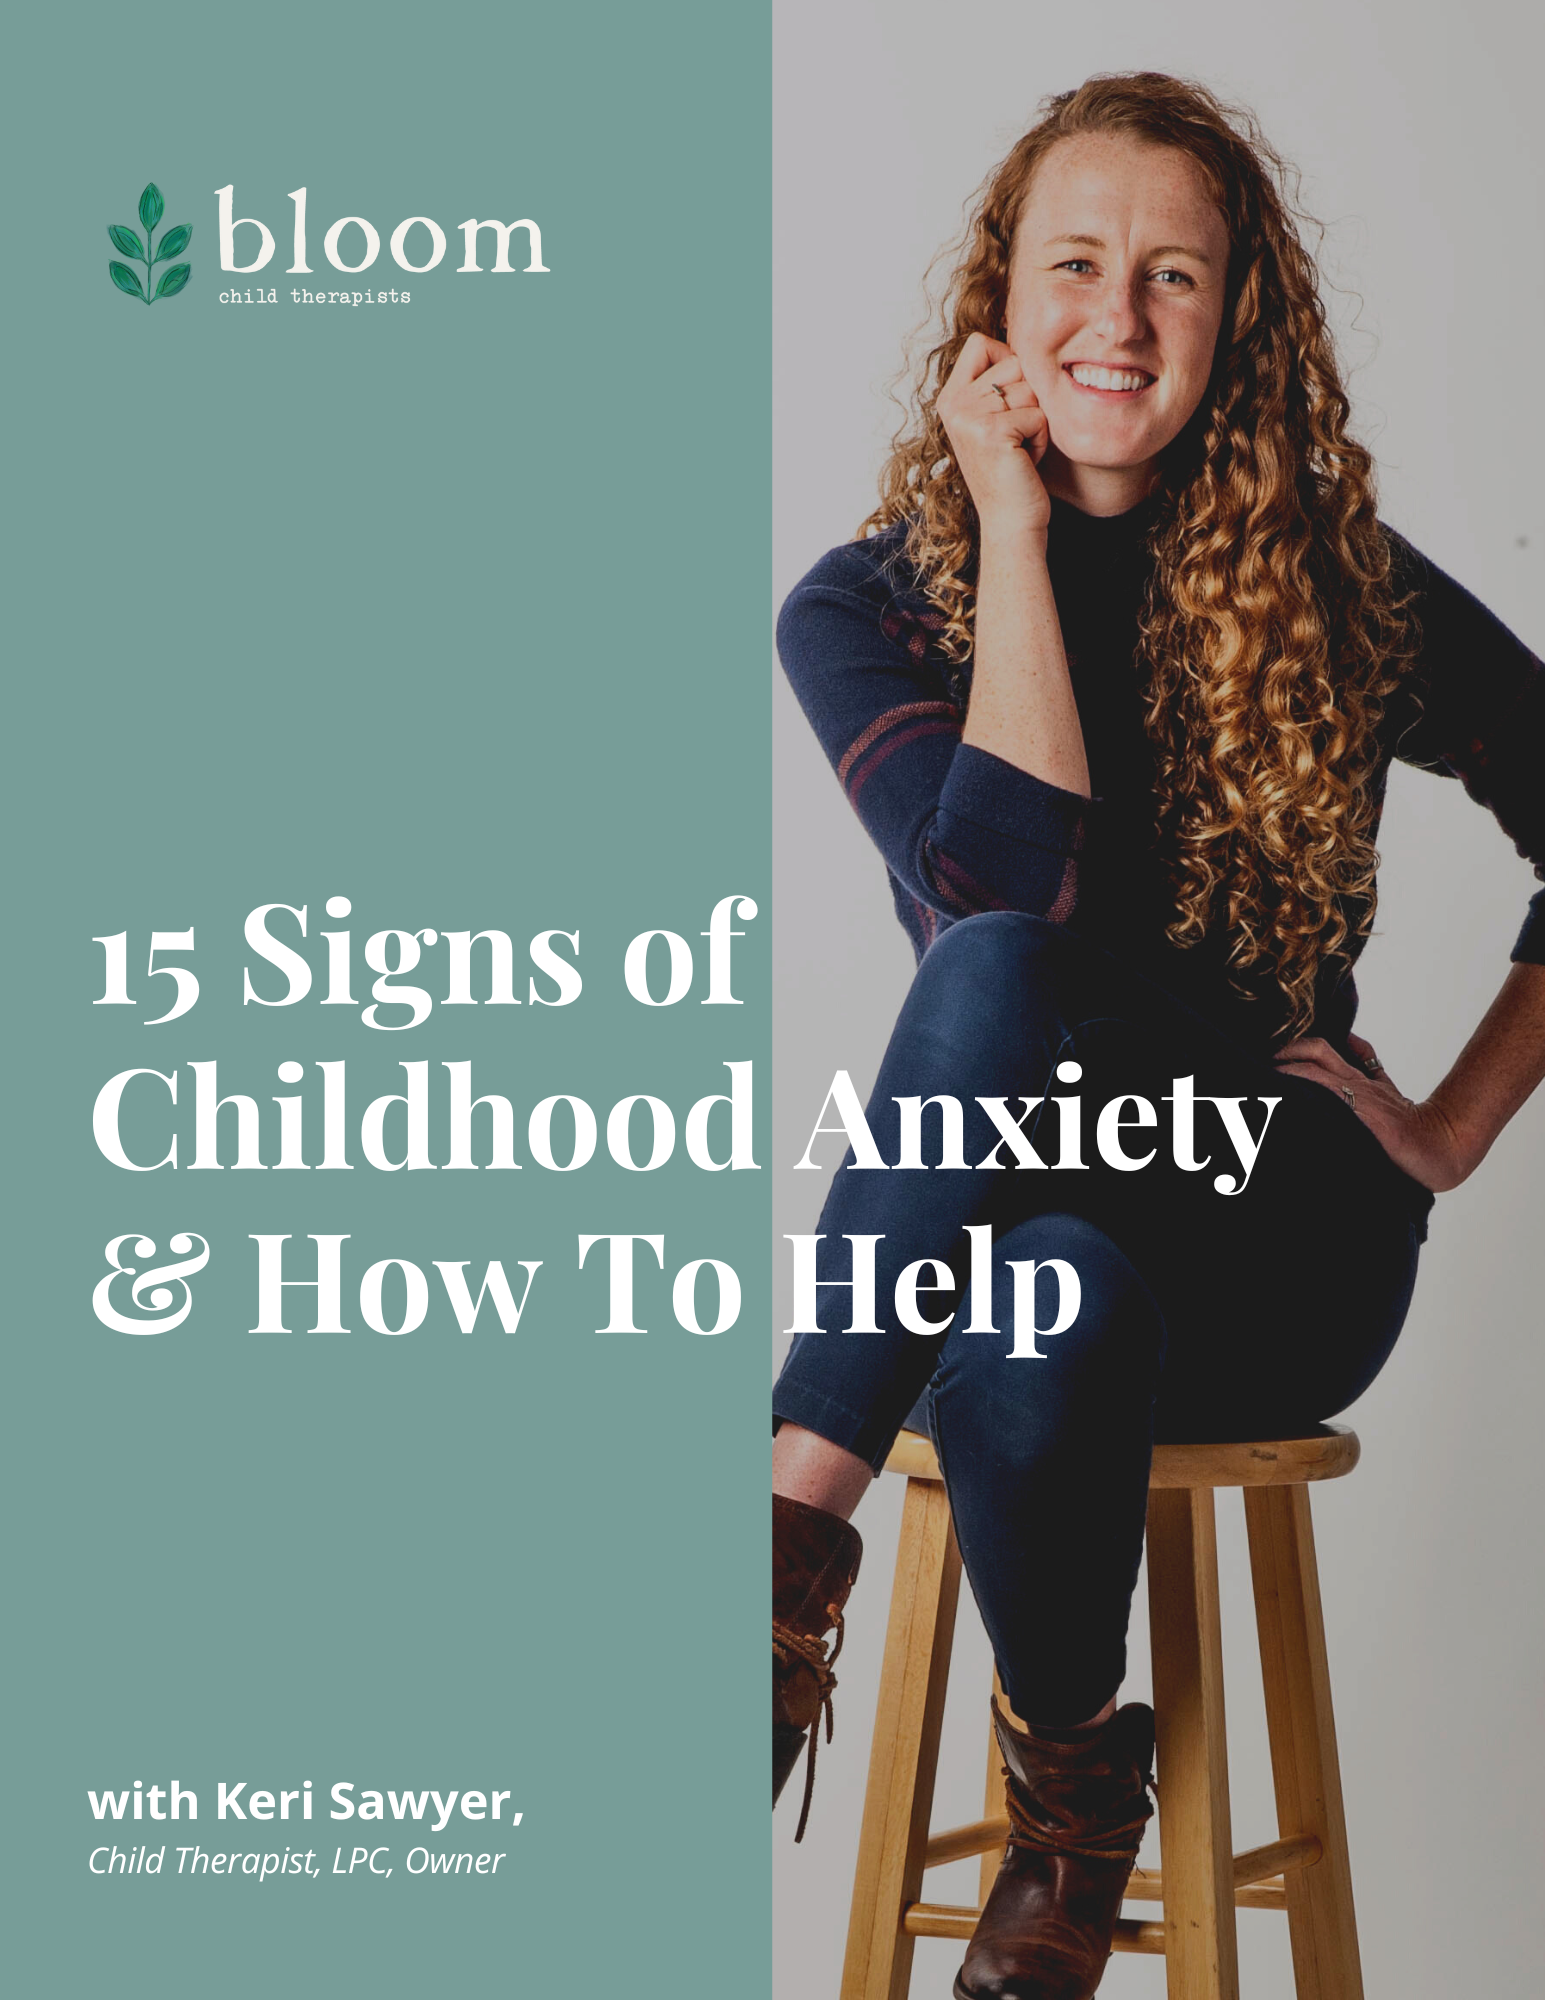 presentation of anxiety in childhood